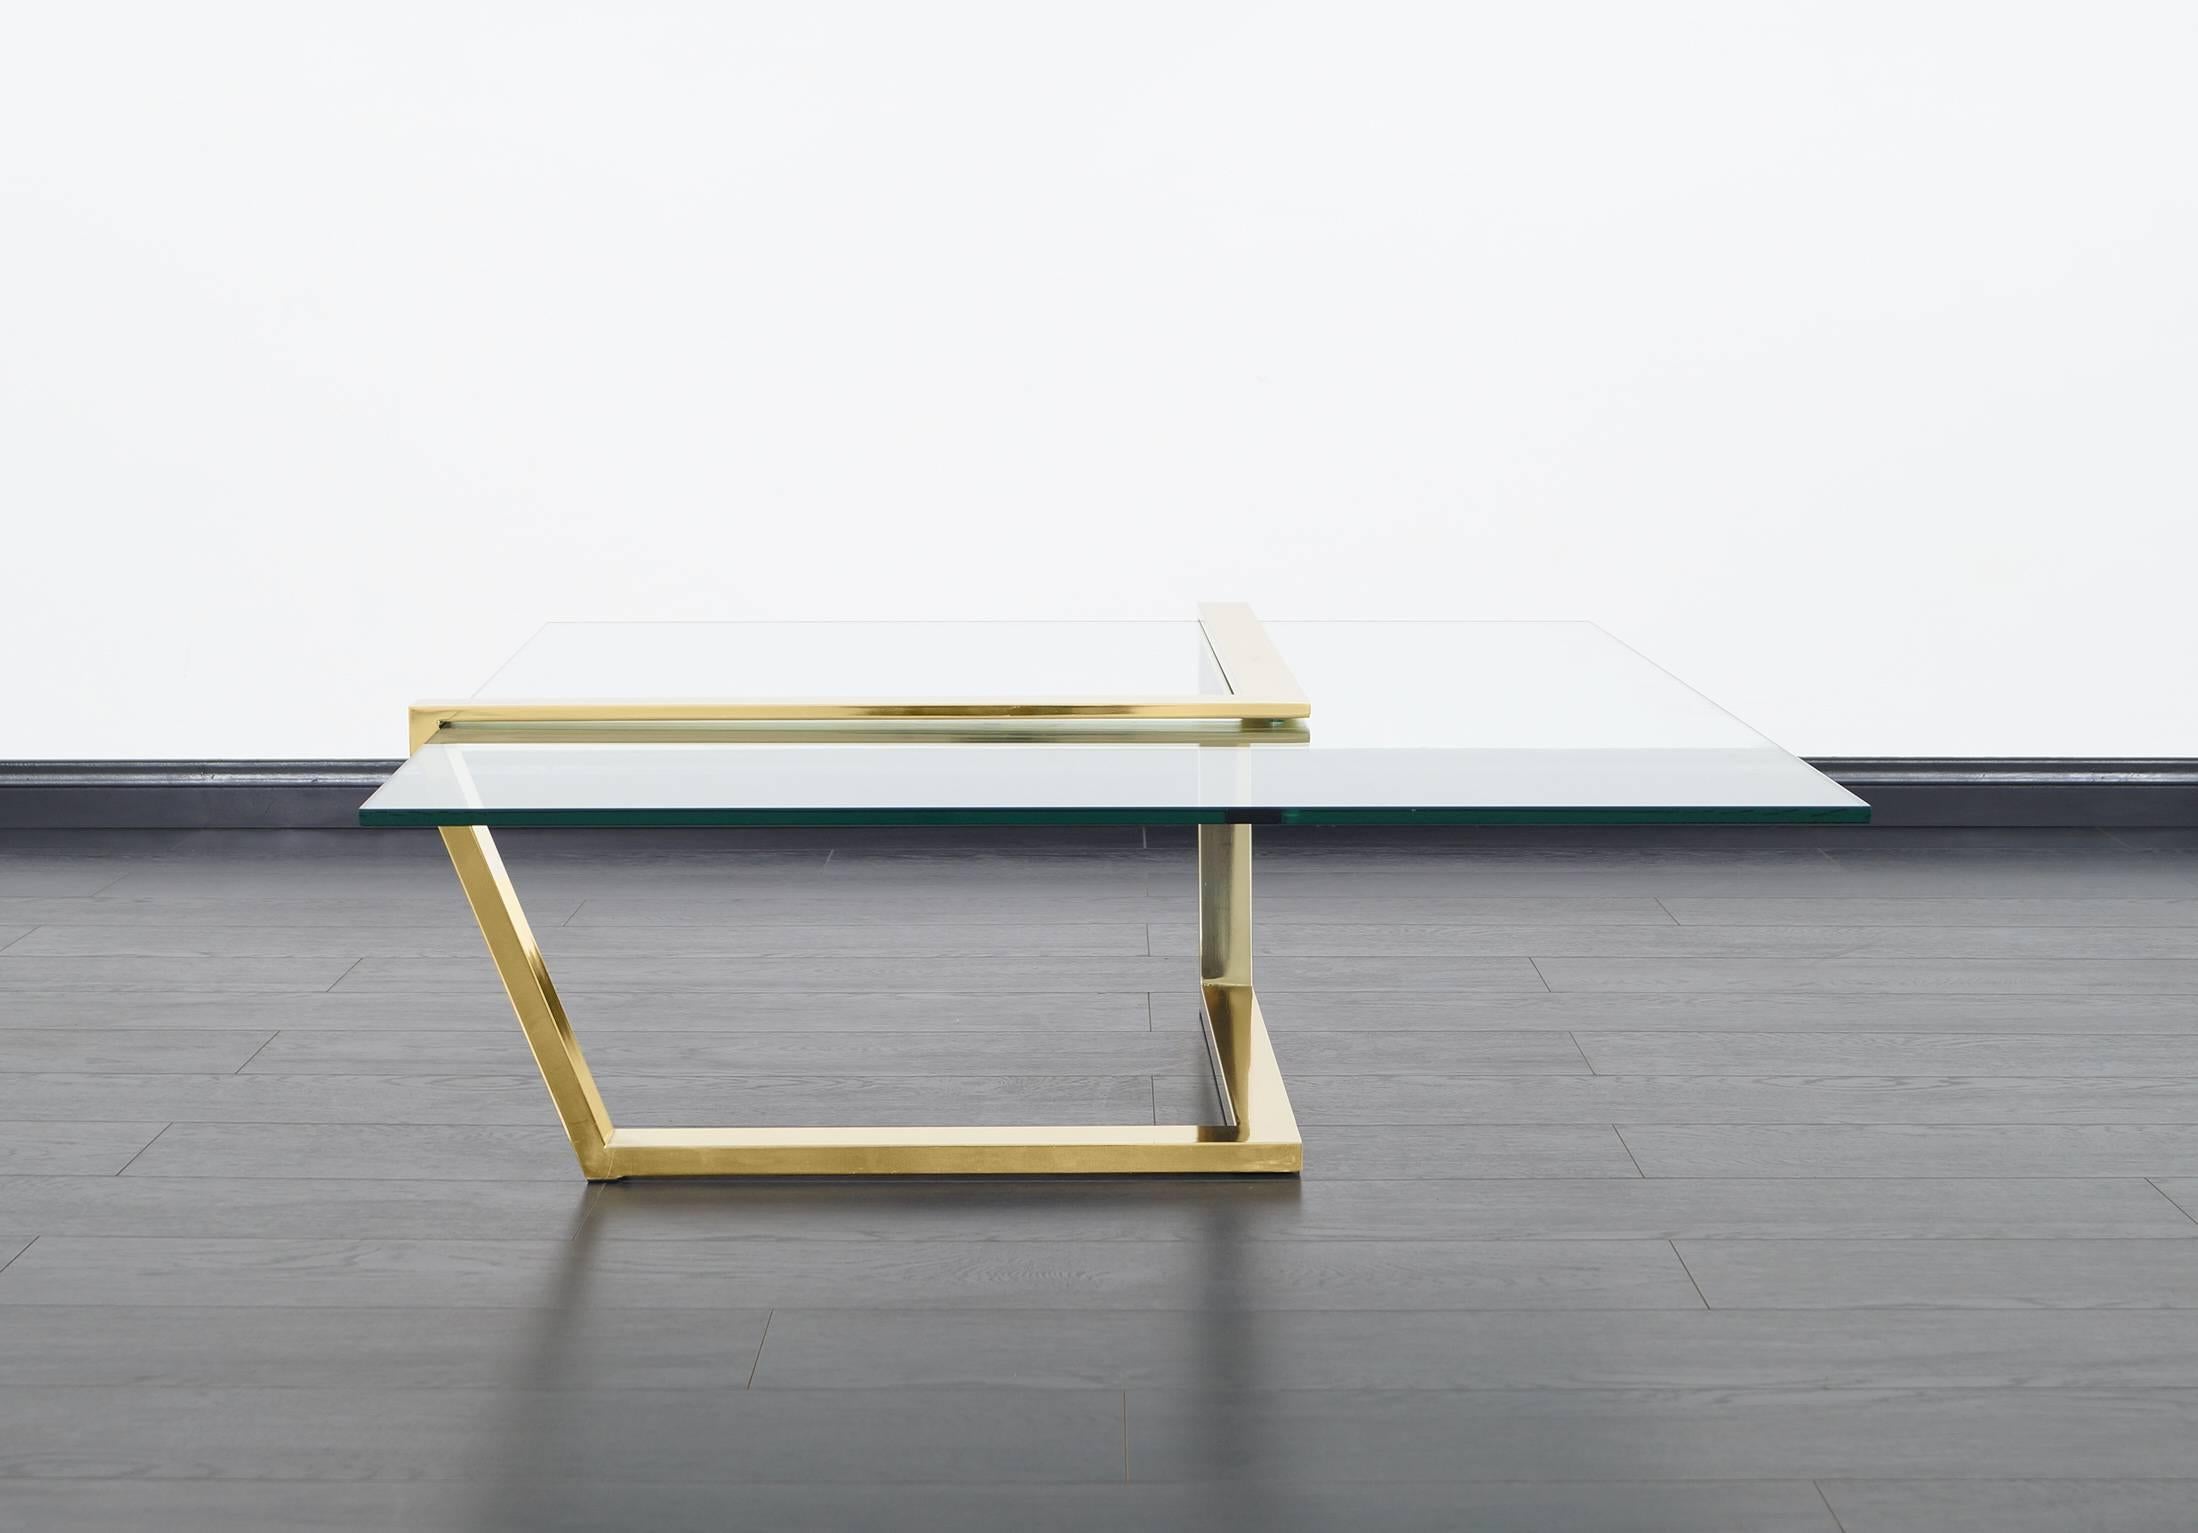 Modernist brass and glass cantilevered coffee table by Design Institute of American. The thick square glass slides into the chevron shaped brass base, giving the appearance of a floating glass top.